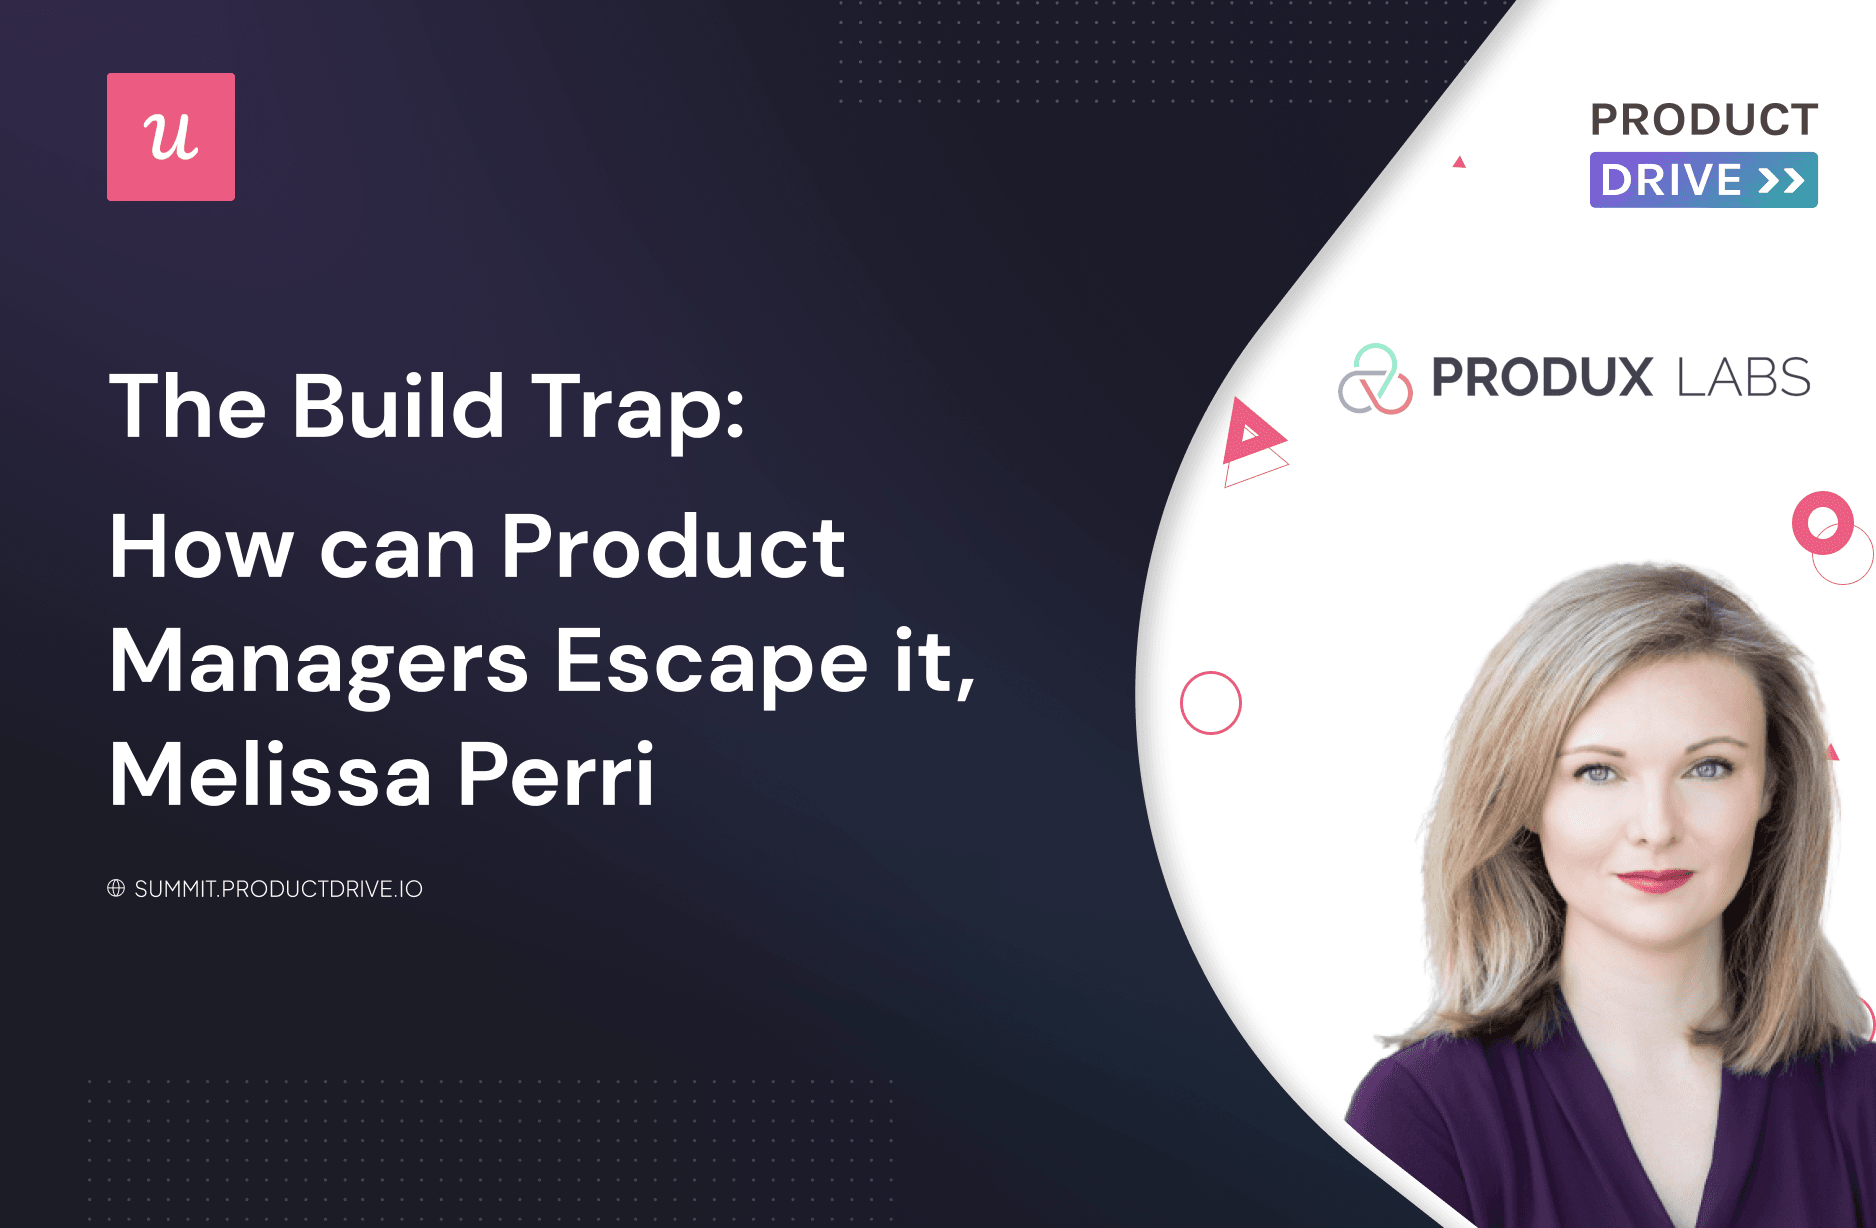 The Build Trap: How can Product Managers Escape It by Melissa Perri cover